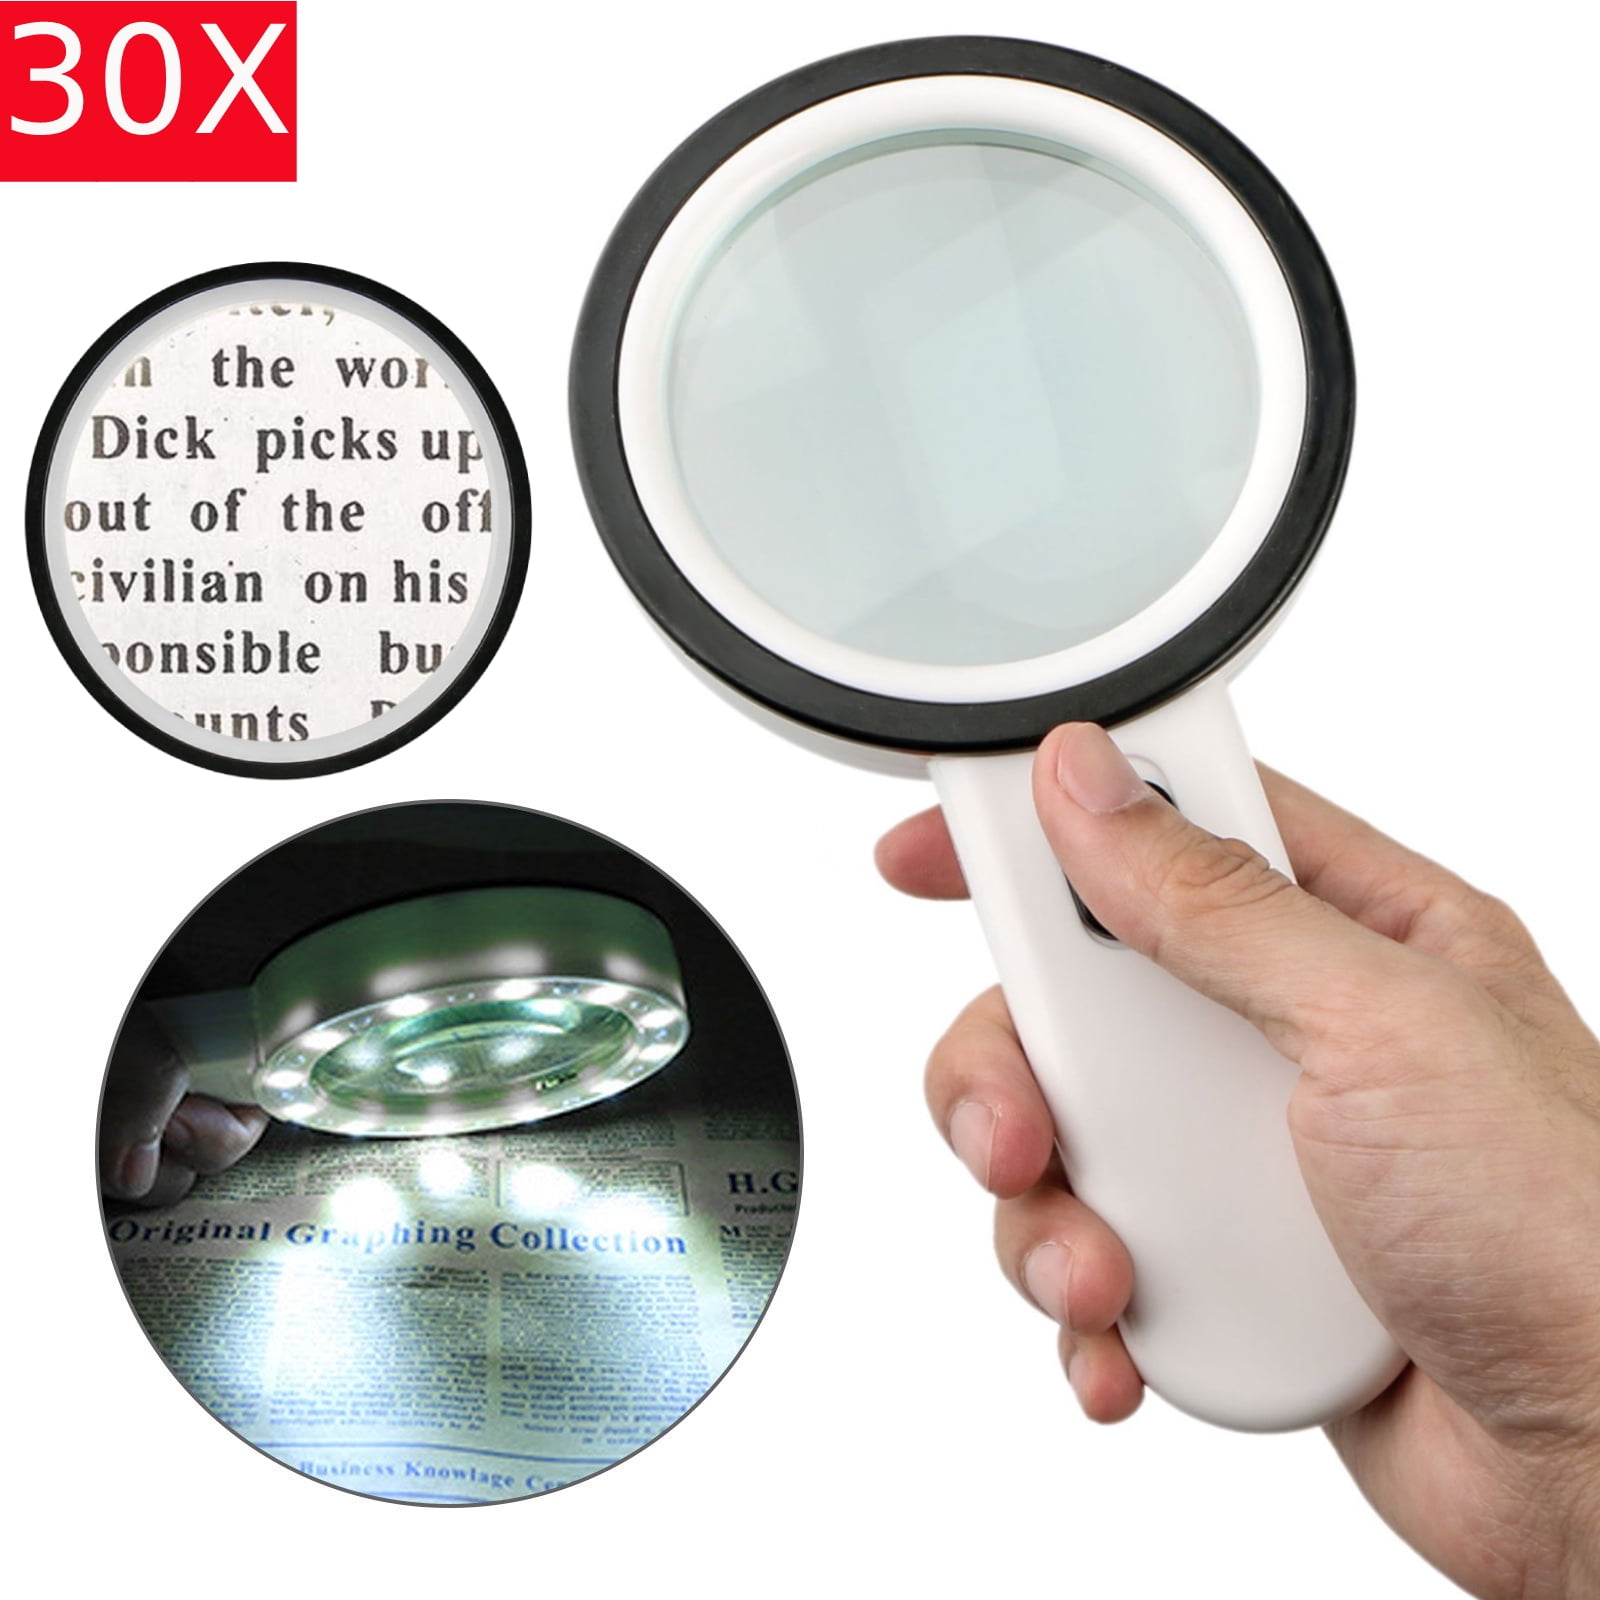 EasY Magnifier Magnifying Glass 2X 4X with Very Bright 12LED Lights Best Magnifier 3 4 Dia Large Round Lens Lighted Handheld Premium Loupe 